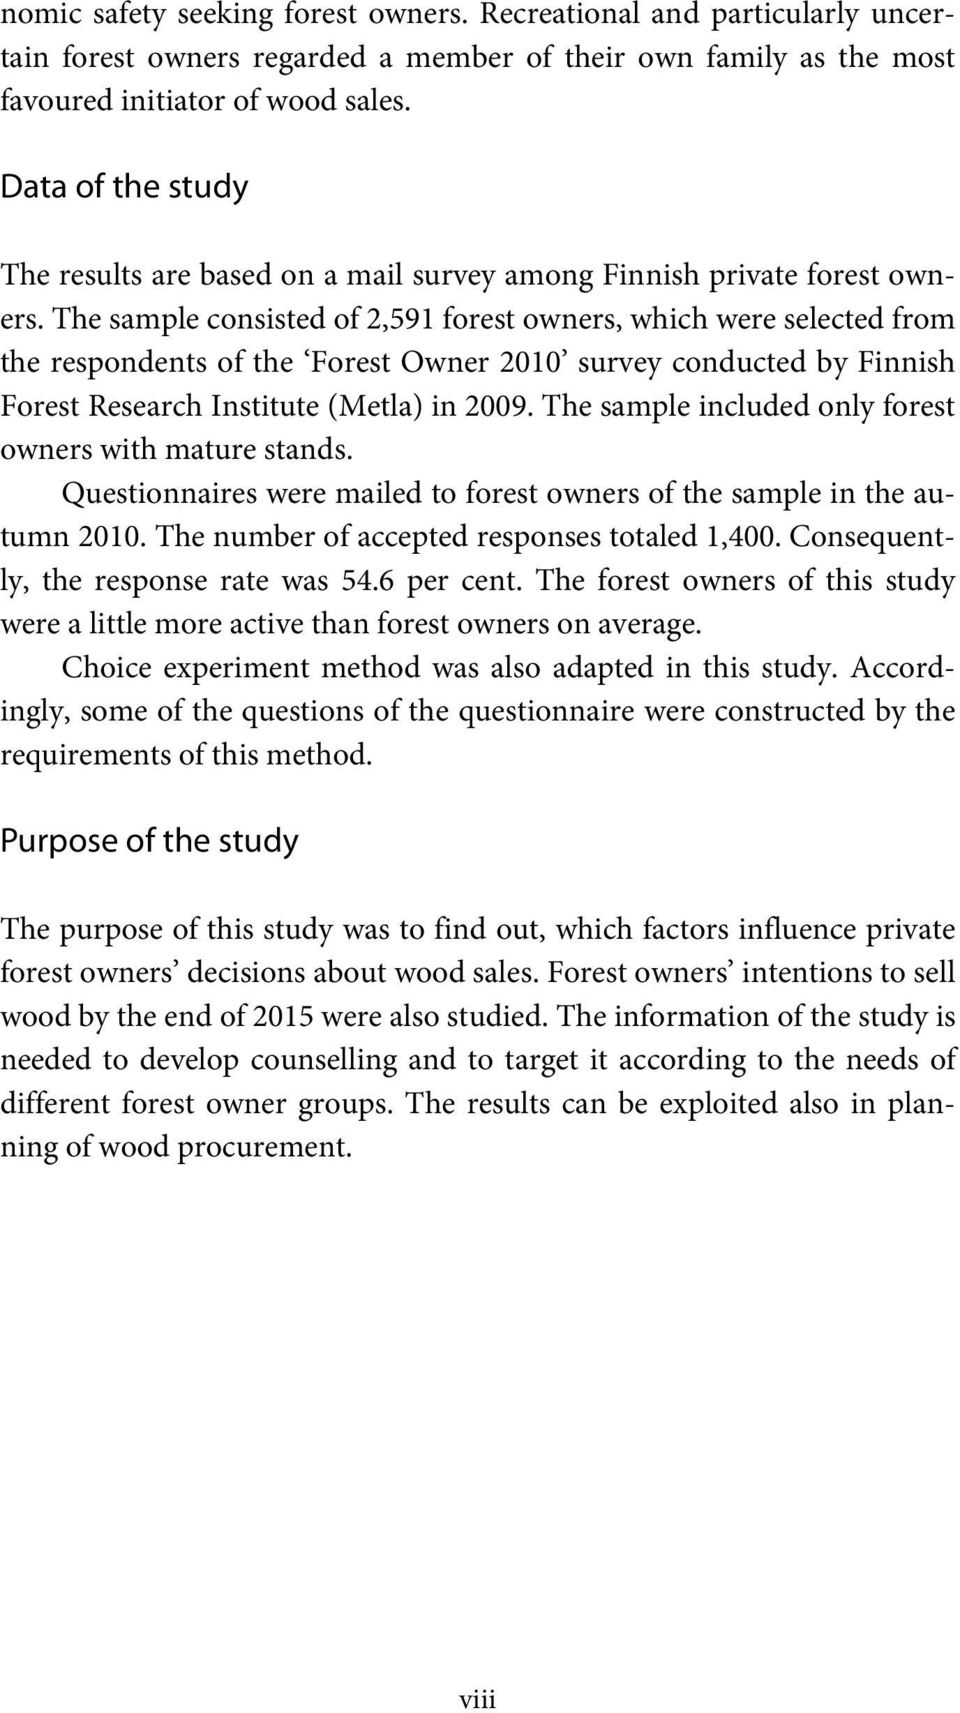 The sample consisted of 2,591 forest owners, which were selected from the respondents of the Forest Owner 2010 survey conducted by Finnish Forest Research Institute (Metla) in 2009.